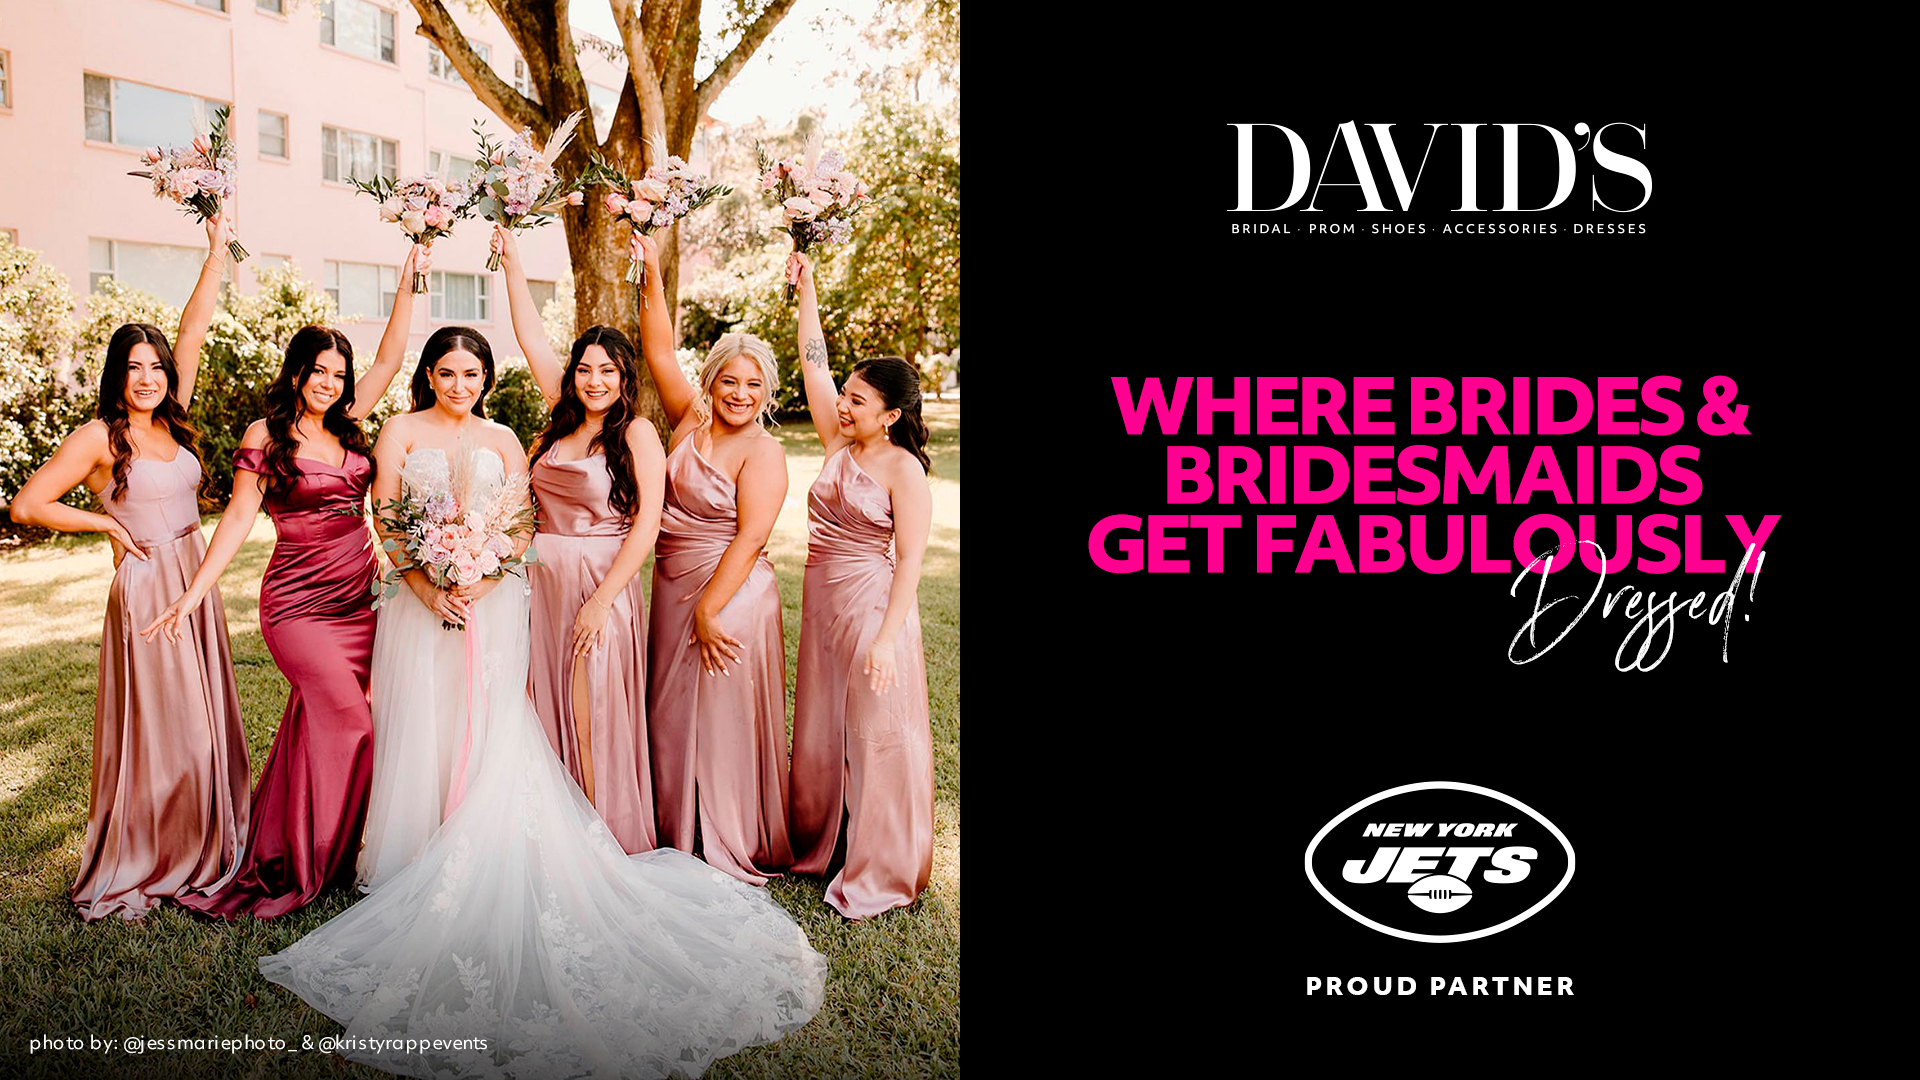 David's Bridal to Capture Kisses in Partnership with the New York Jets